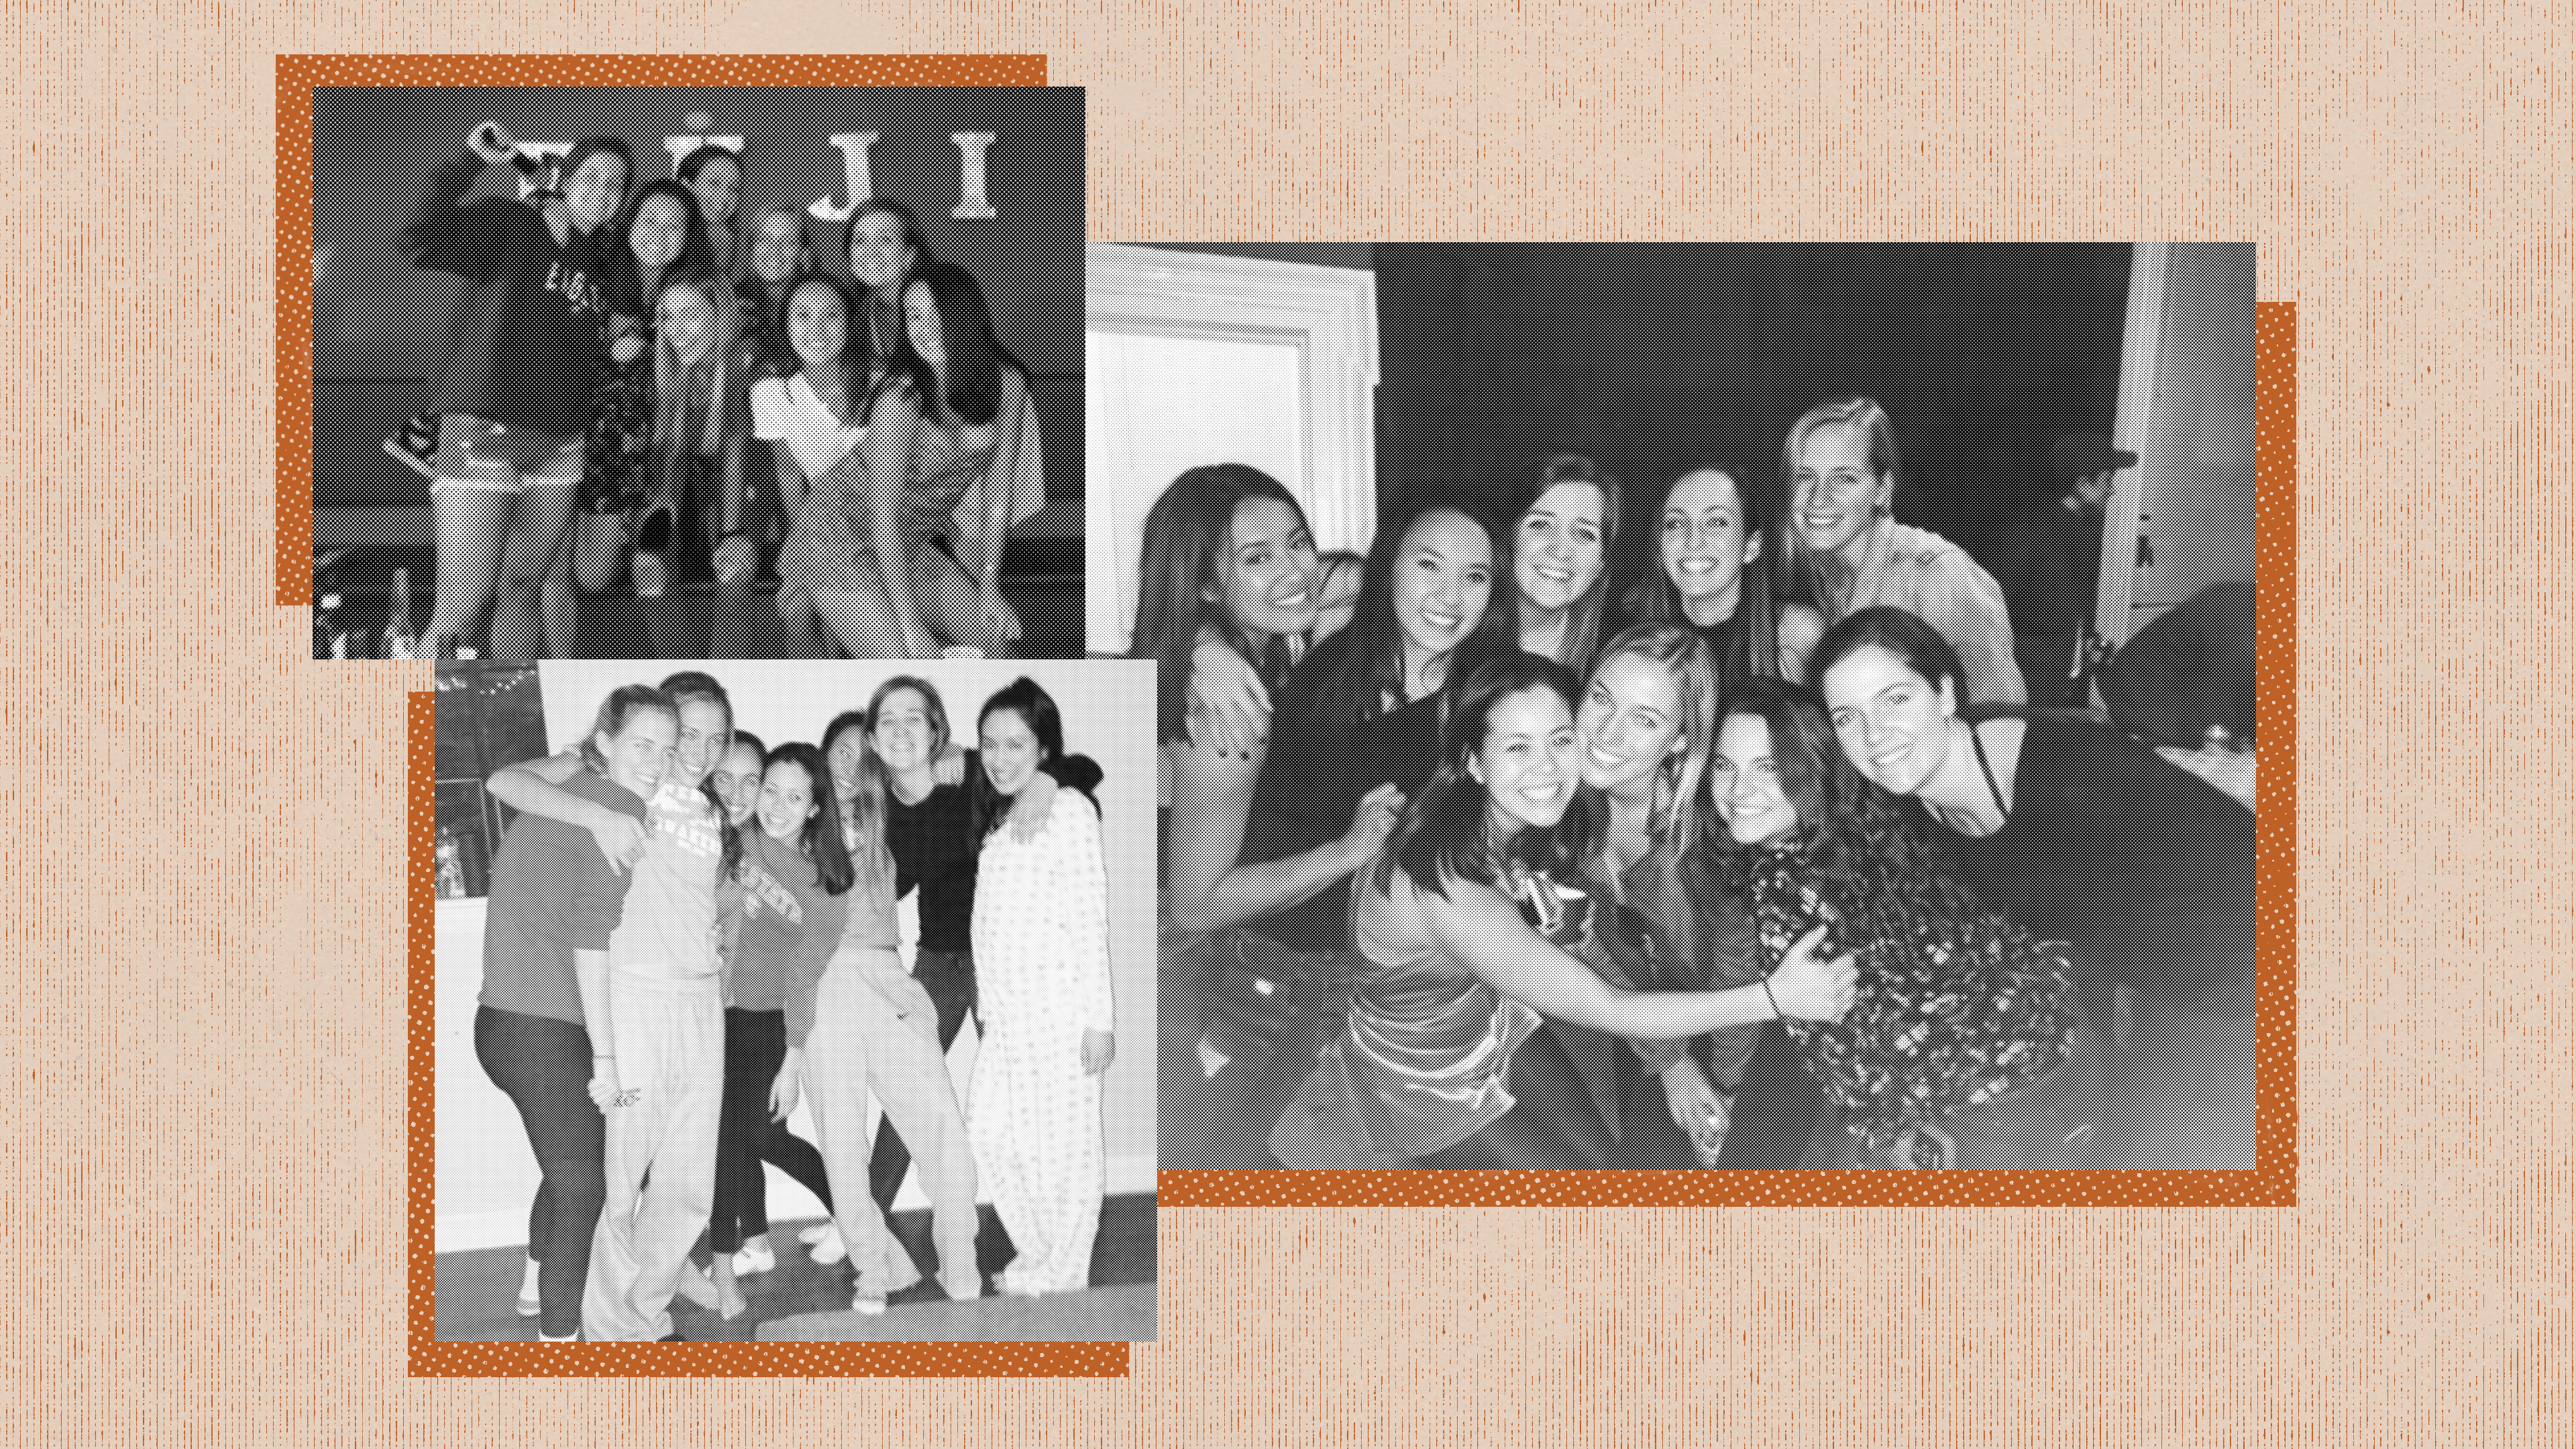 Three black and white photos of the author and her high school friends against an orange background.